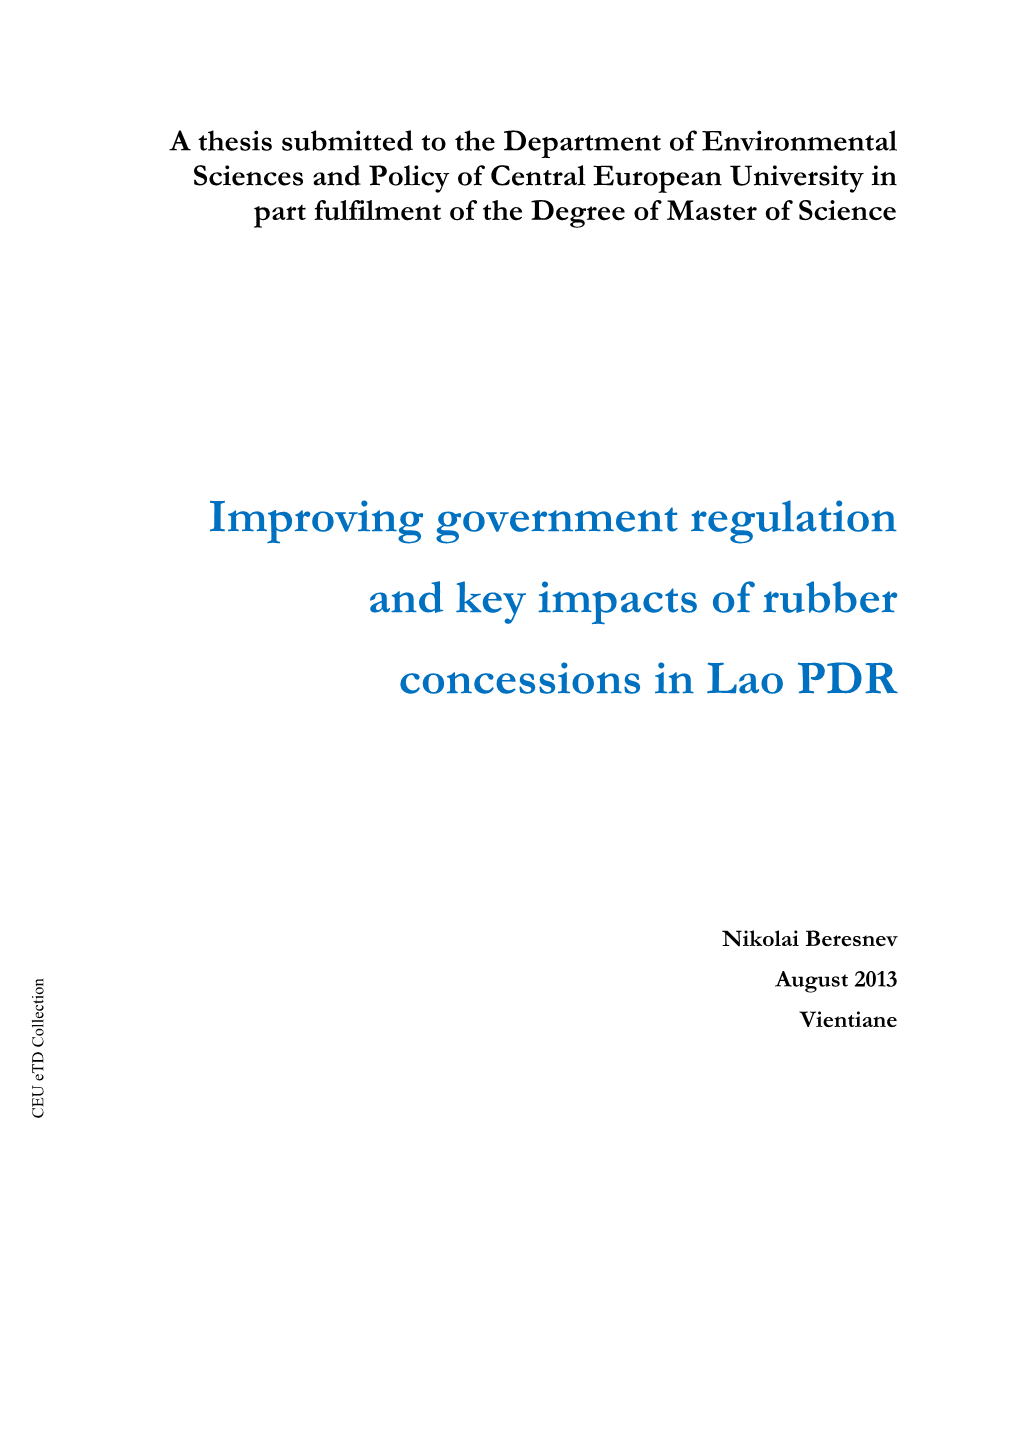 Improving Government Regulation and Key Impacts of Rubber Concessions in Lao PDR Lao in Concessions Rubber of Impacts Key and Regulation Government Improving